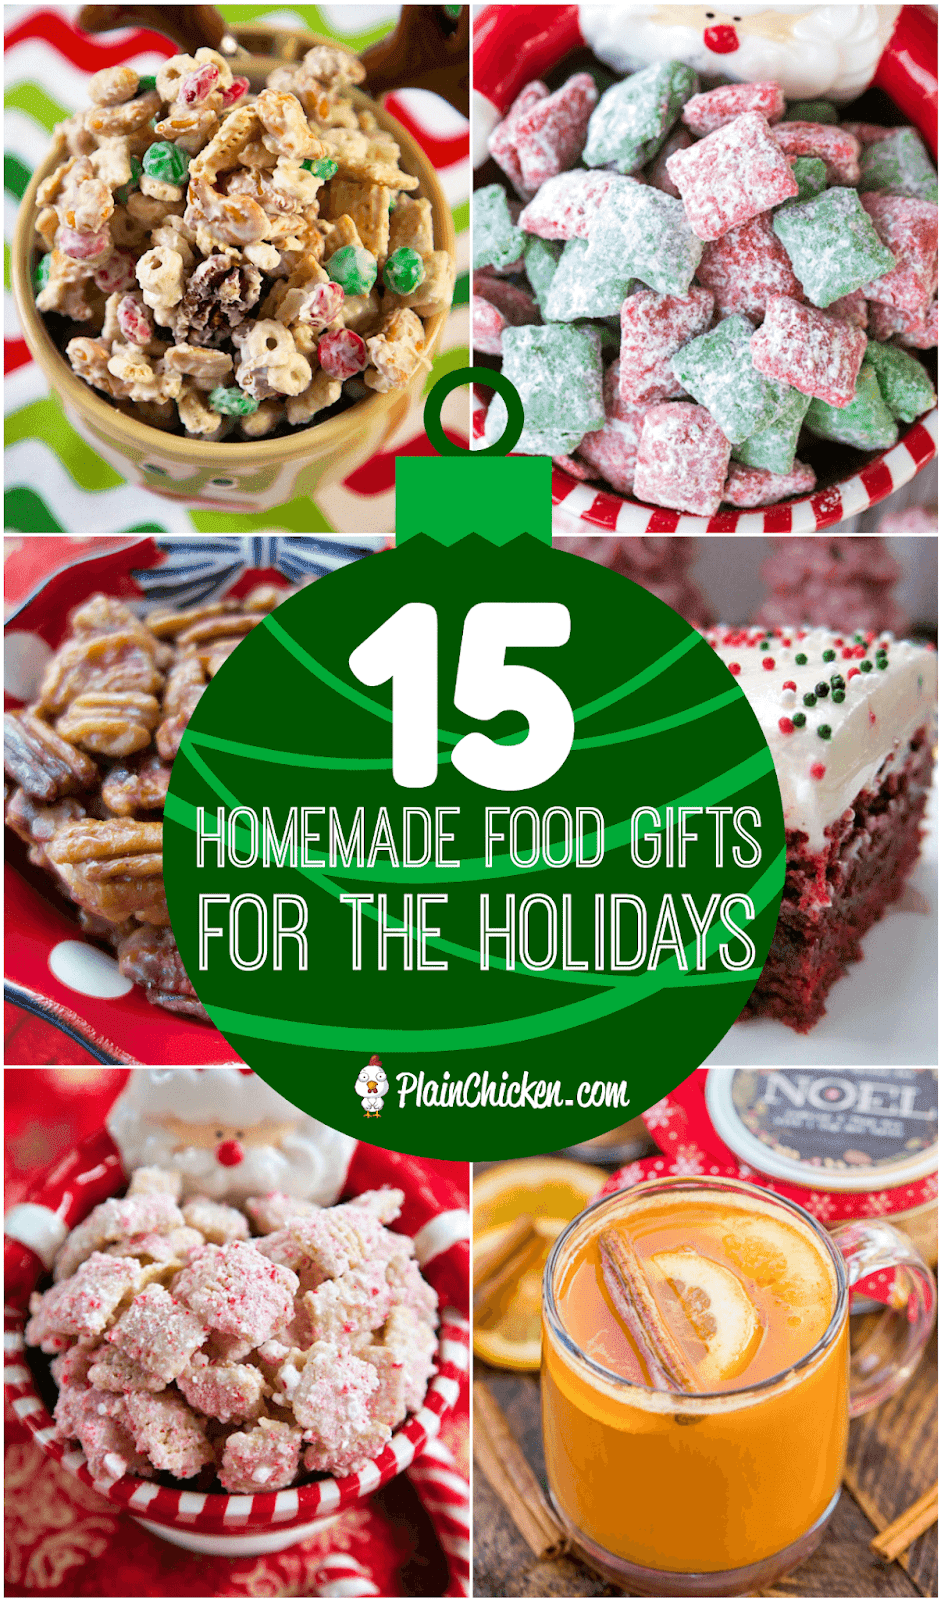 15 Homemade Food Gifts for the Holidays - Plain Chicken - 15 Homemade Food Gifts for the Holidays - Plain Chicken -   18 homemade food gifts for xmas ideas